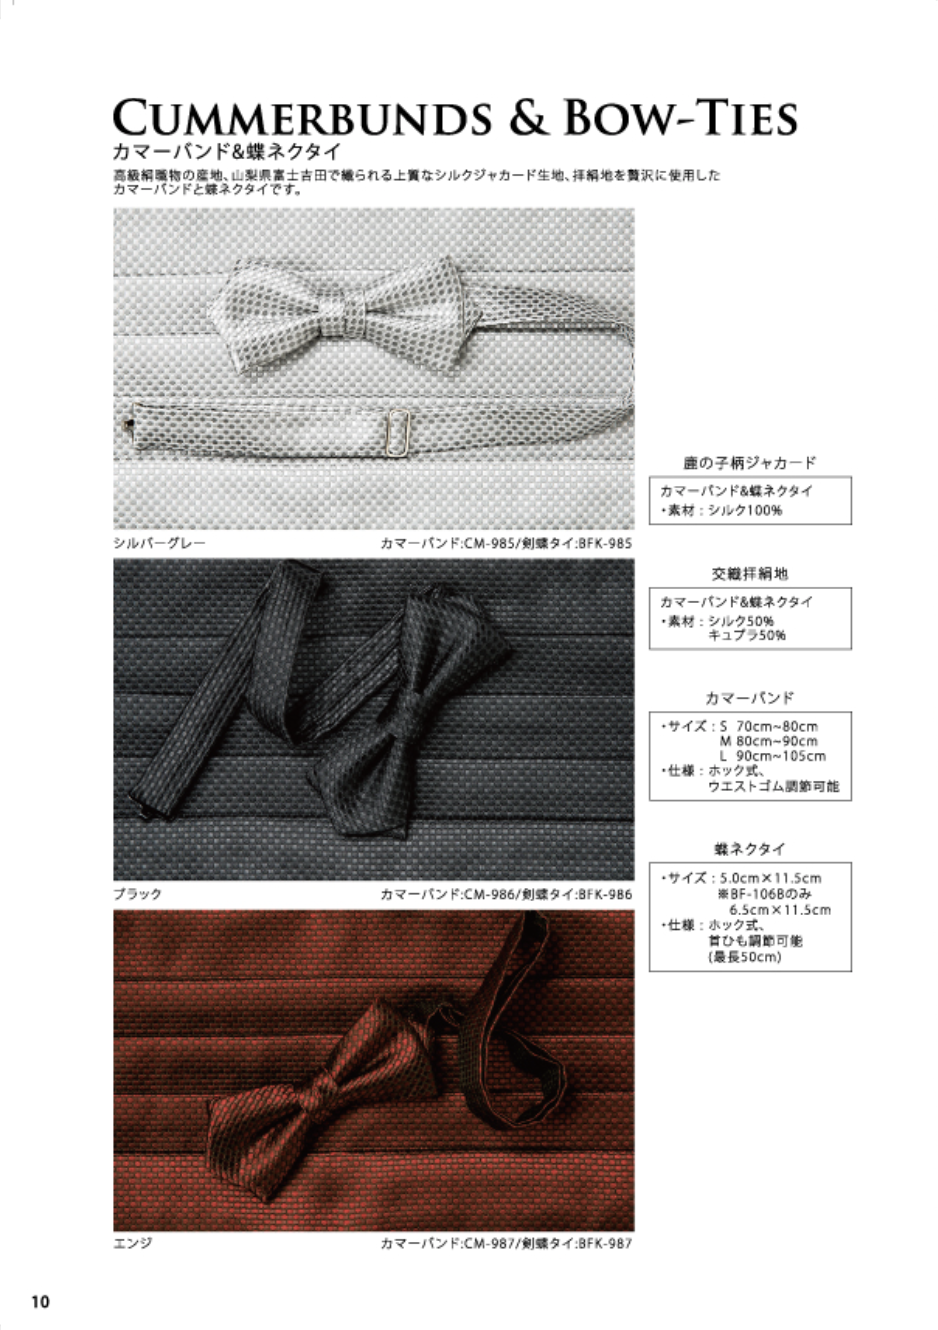 EXCY FORMAL ACCESSORY COLLECTION Vol.8 pg.10